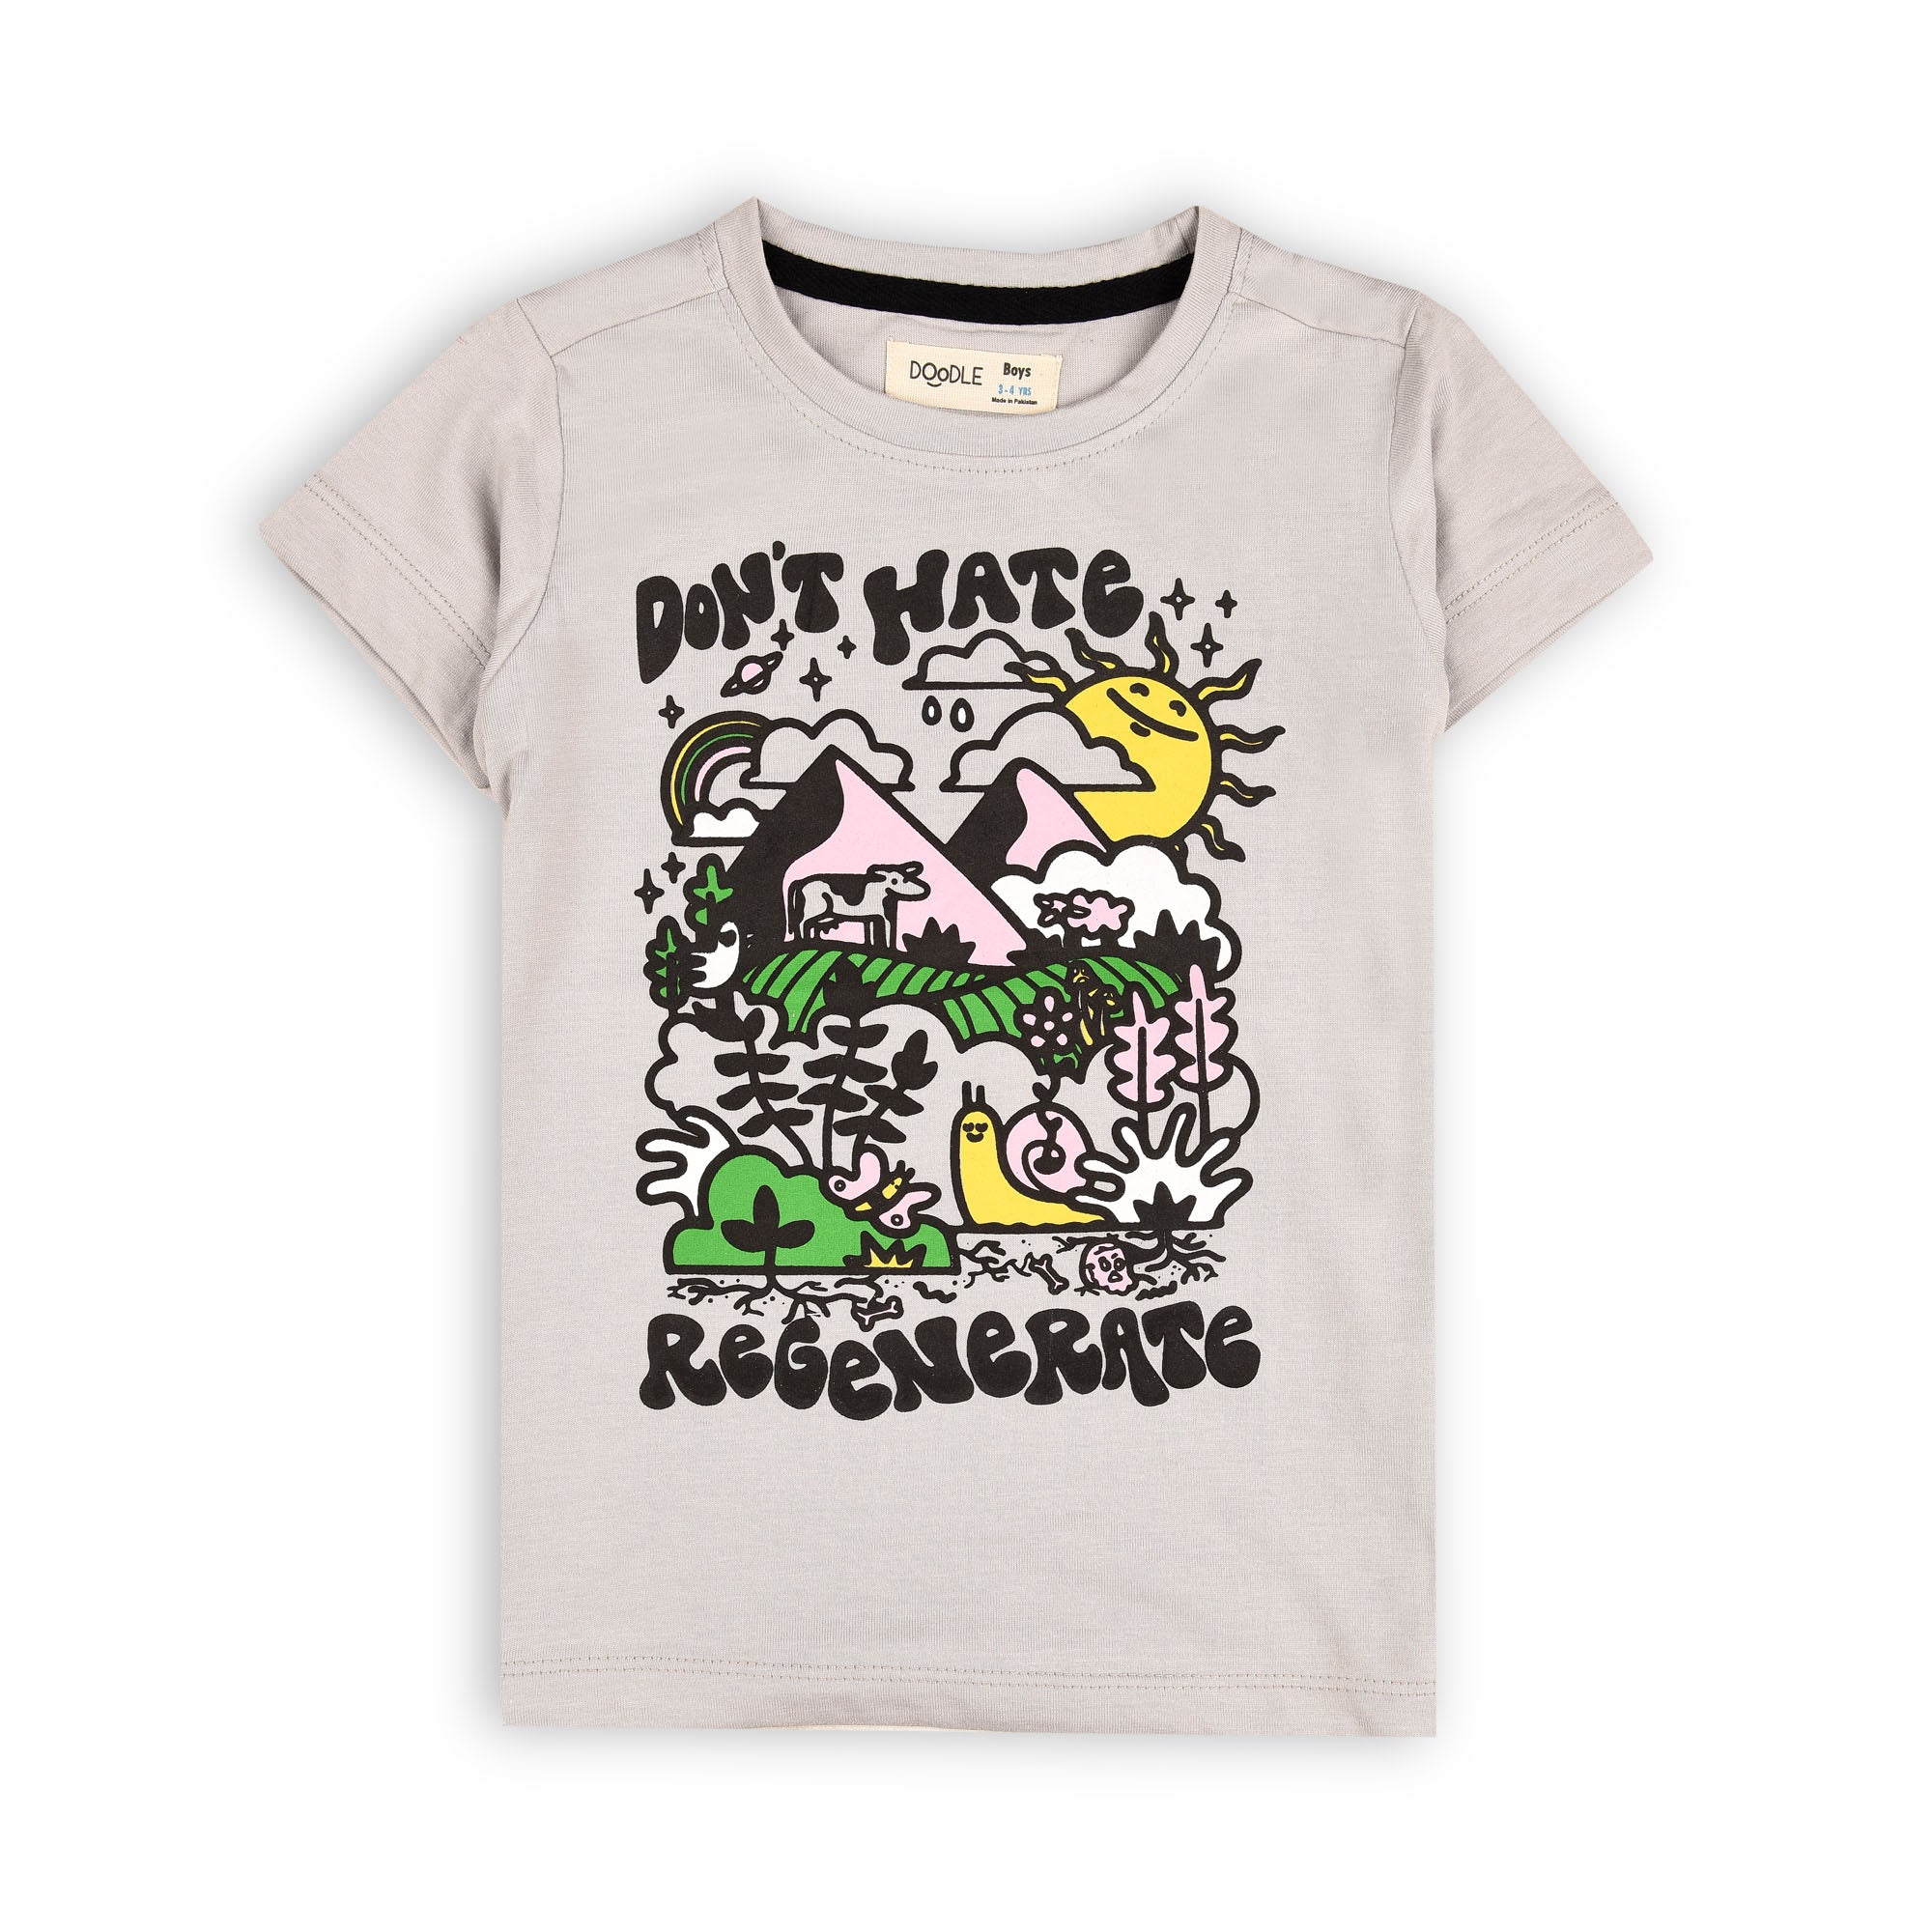 Don't Hate, Regenerate Graphic Tee